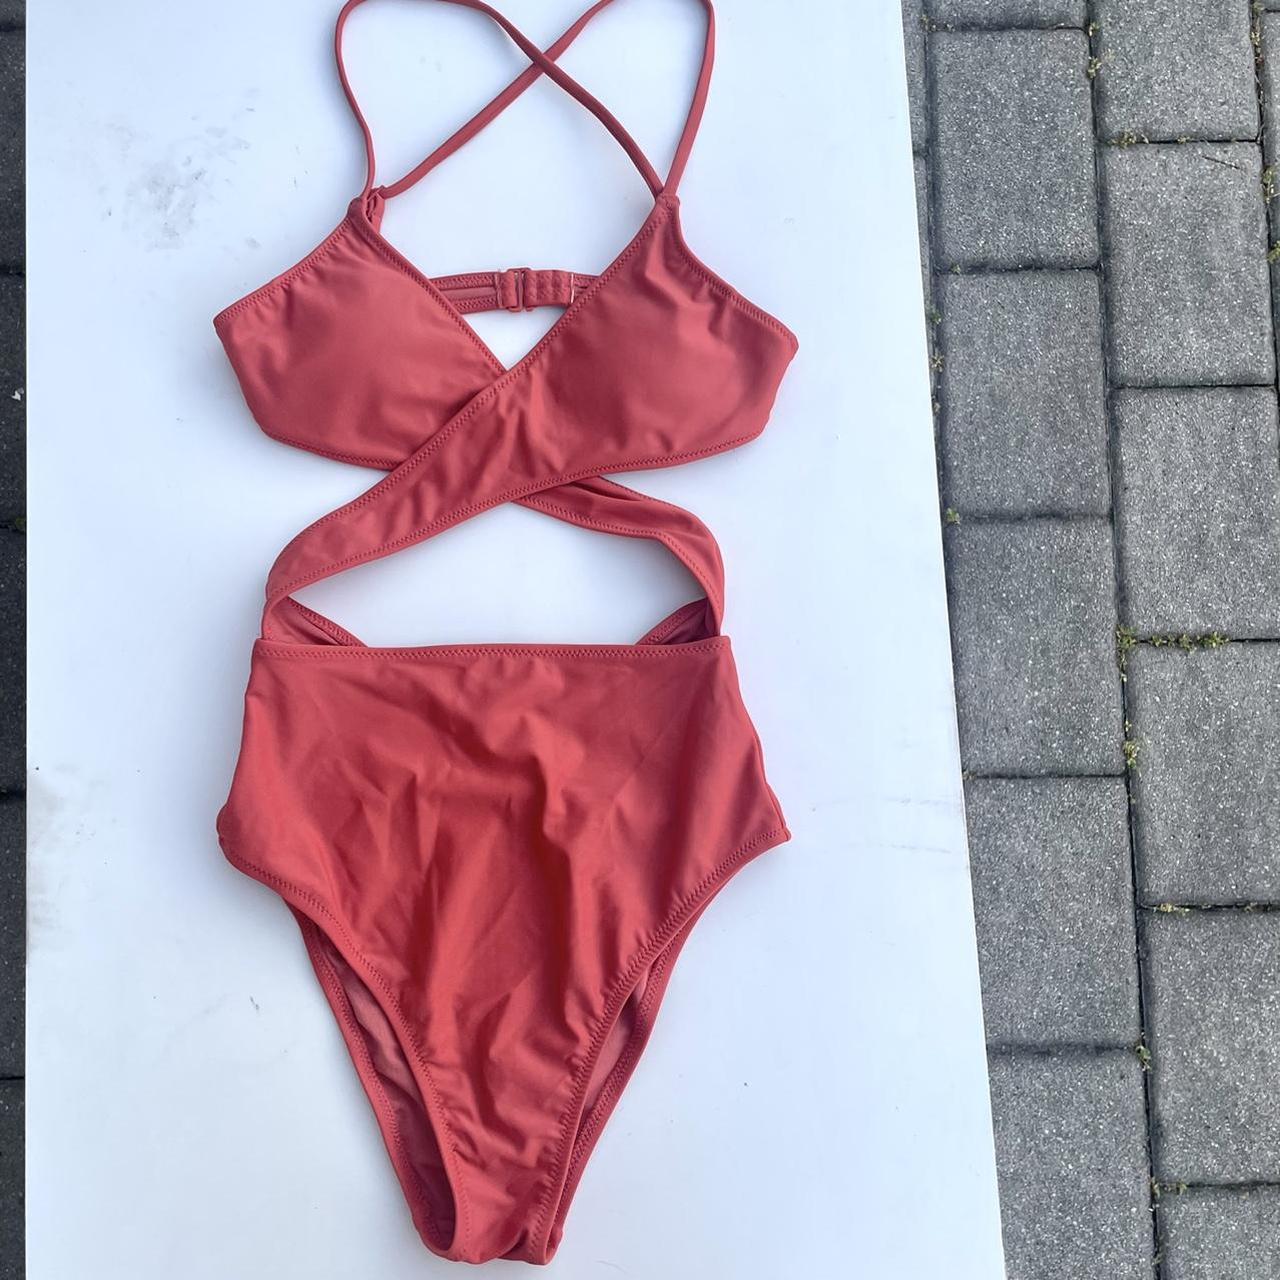 Product Image 1 - Aerie One Piece Swimsuit

Size XS.